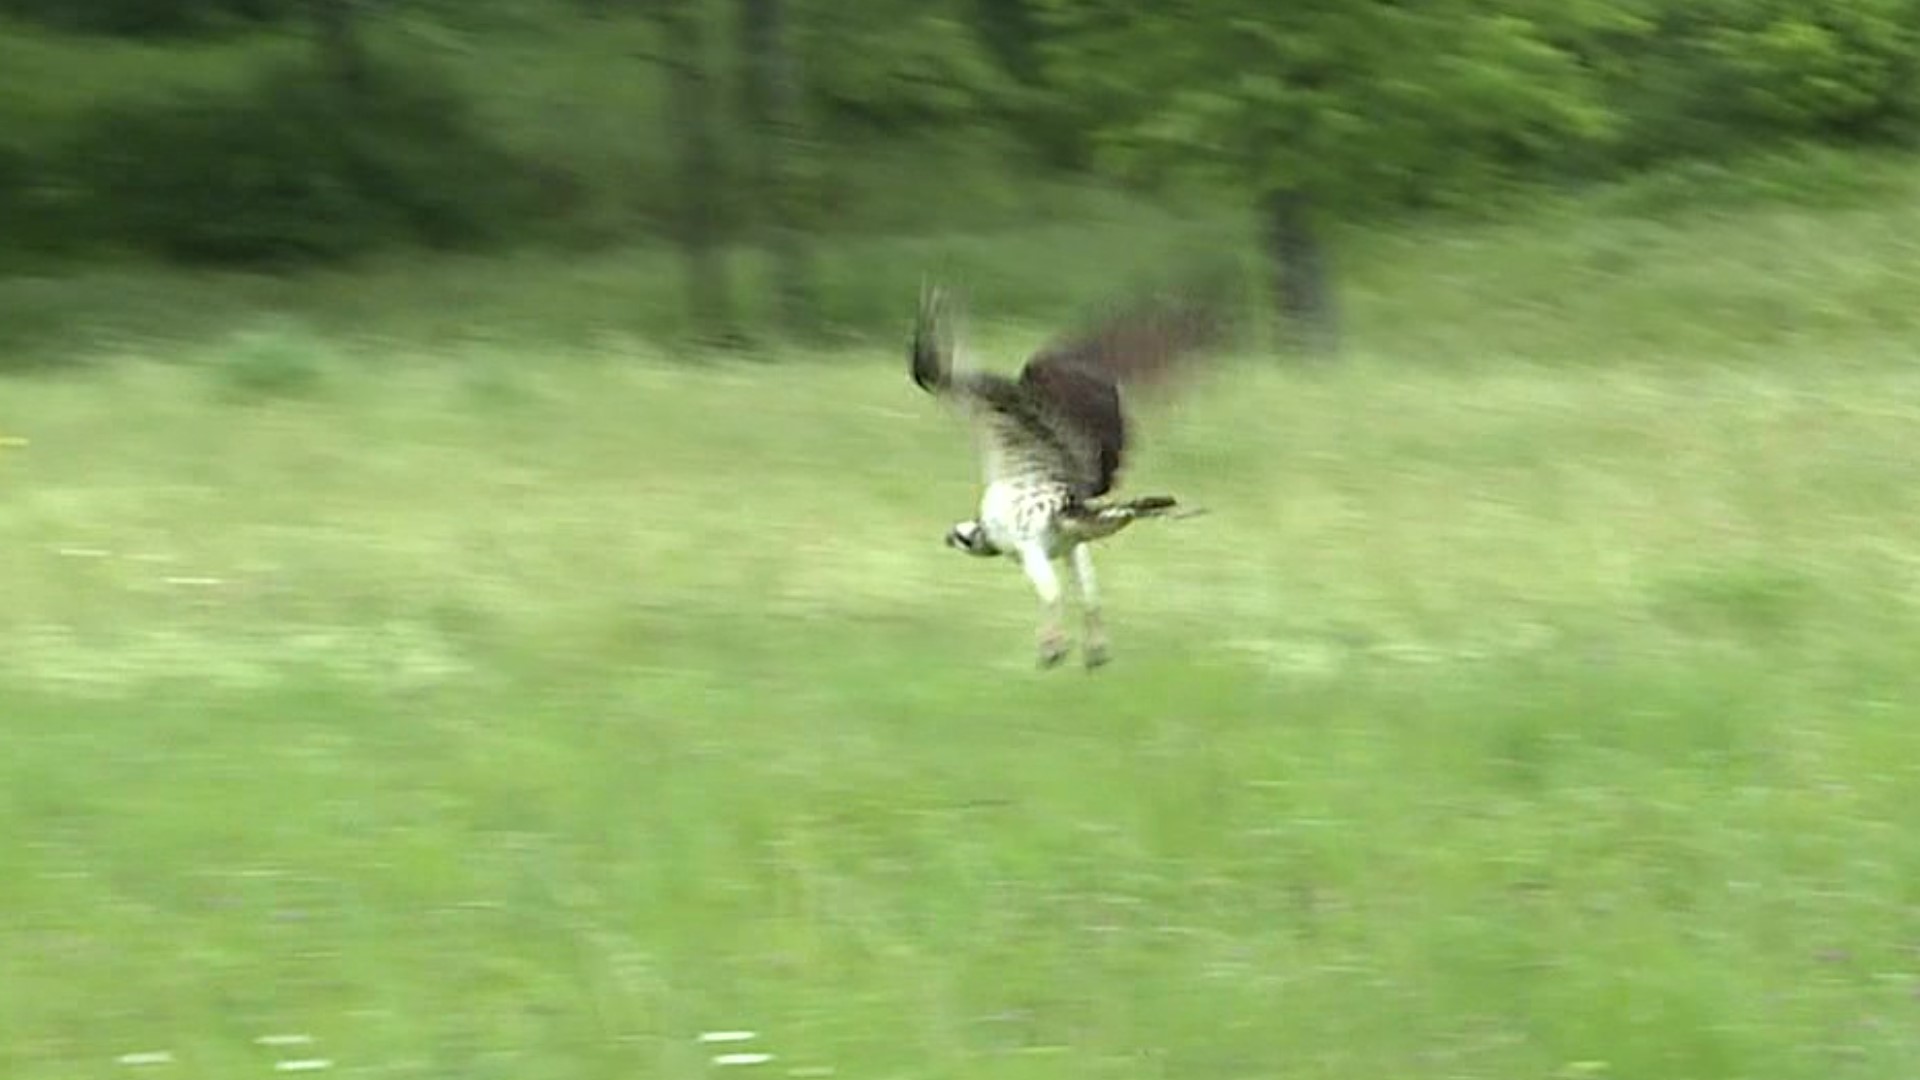 A wildlife center in Schuylkill County spent the last two months nursing an osprey back to health. On Friday, the bird was released back into the wild.